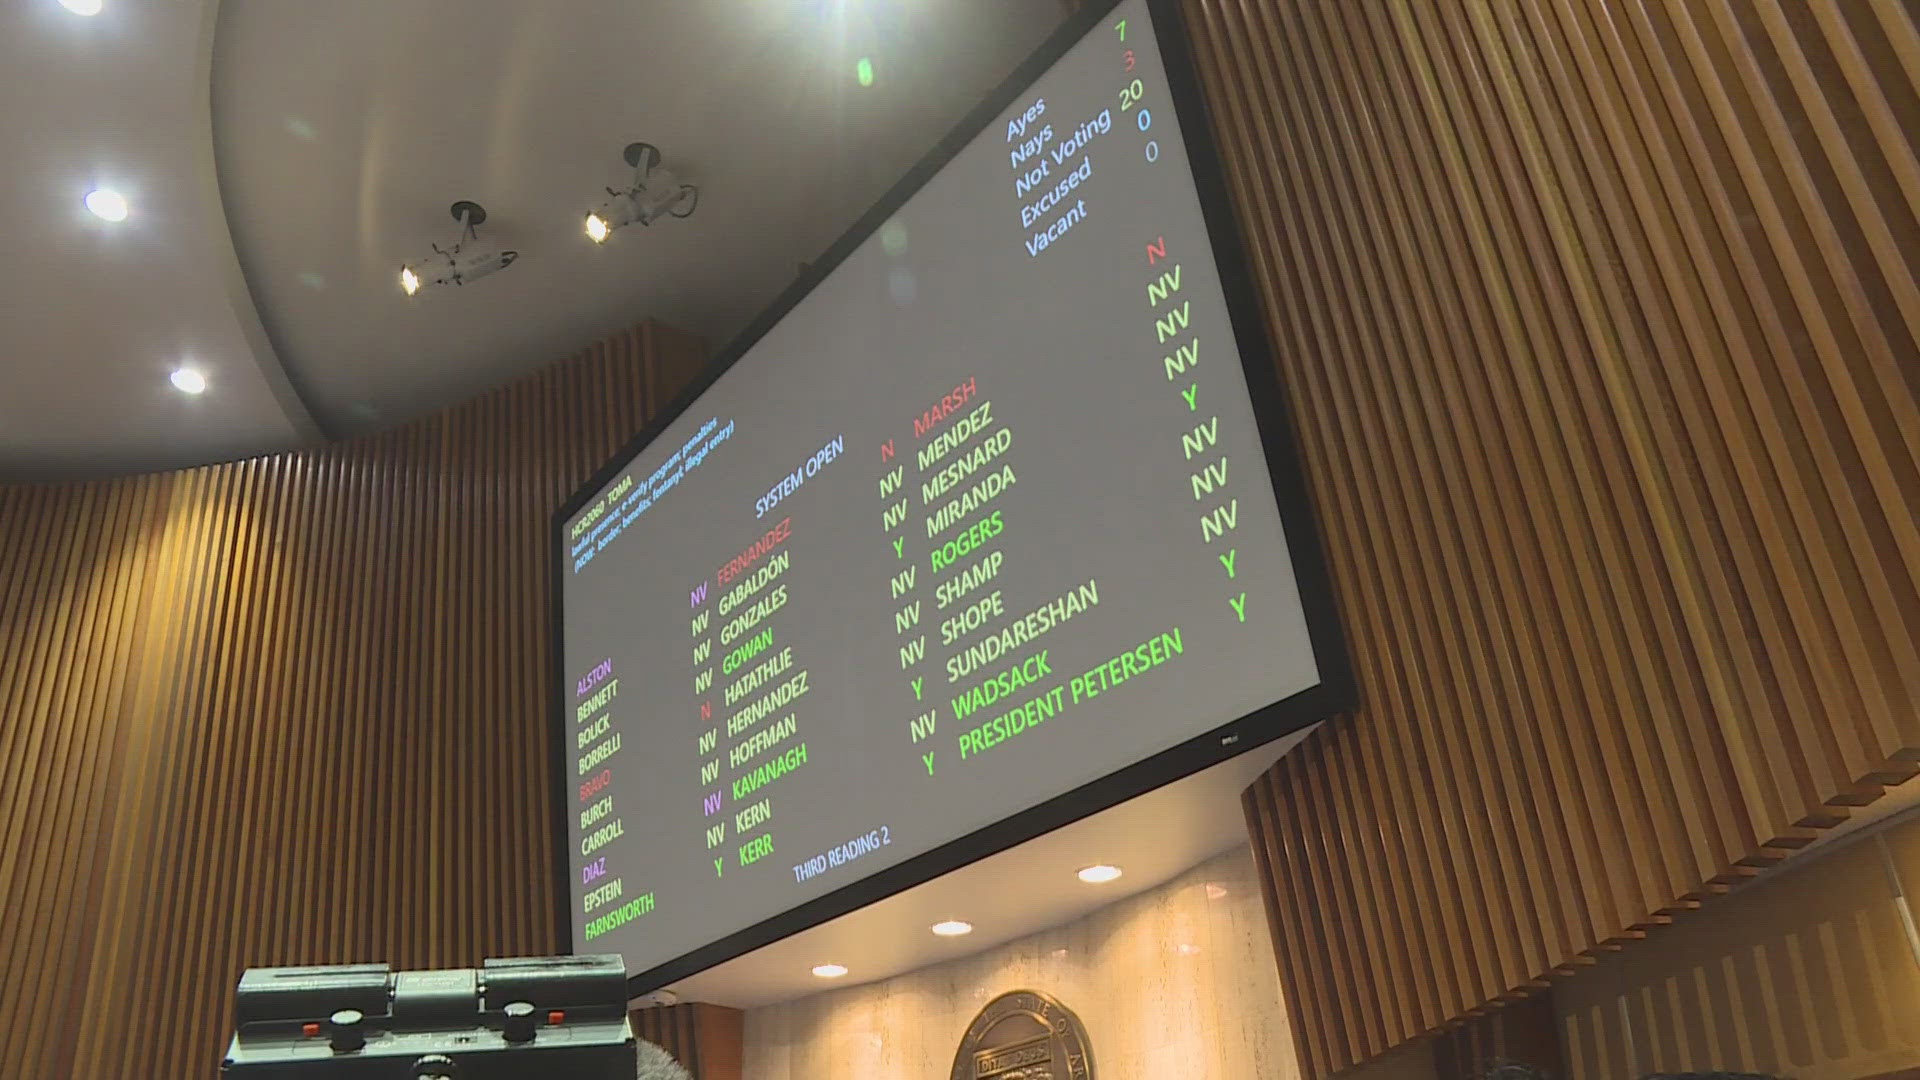 The controversial bill will now head to the House for approval.